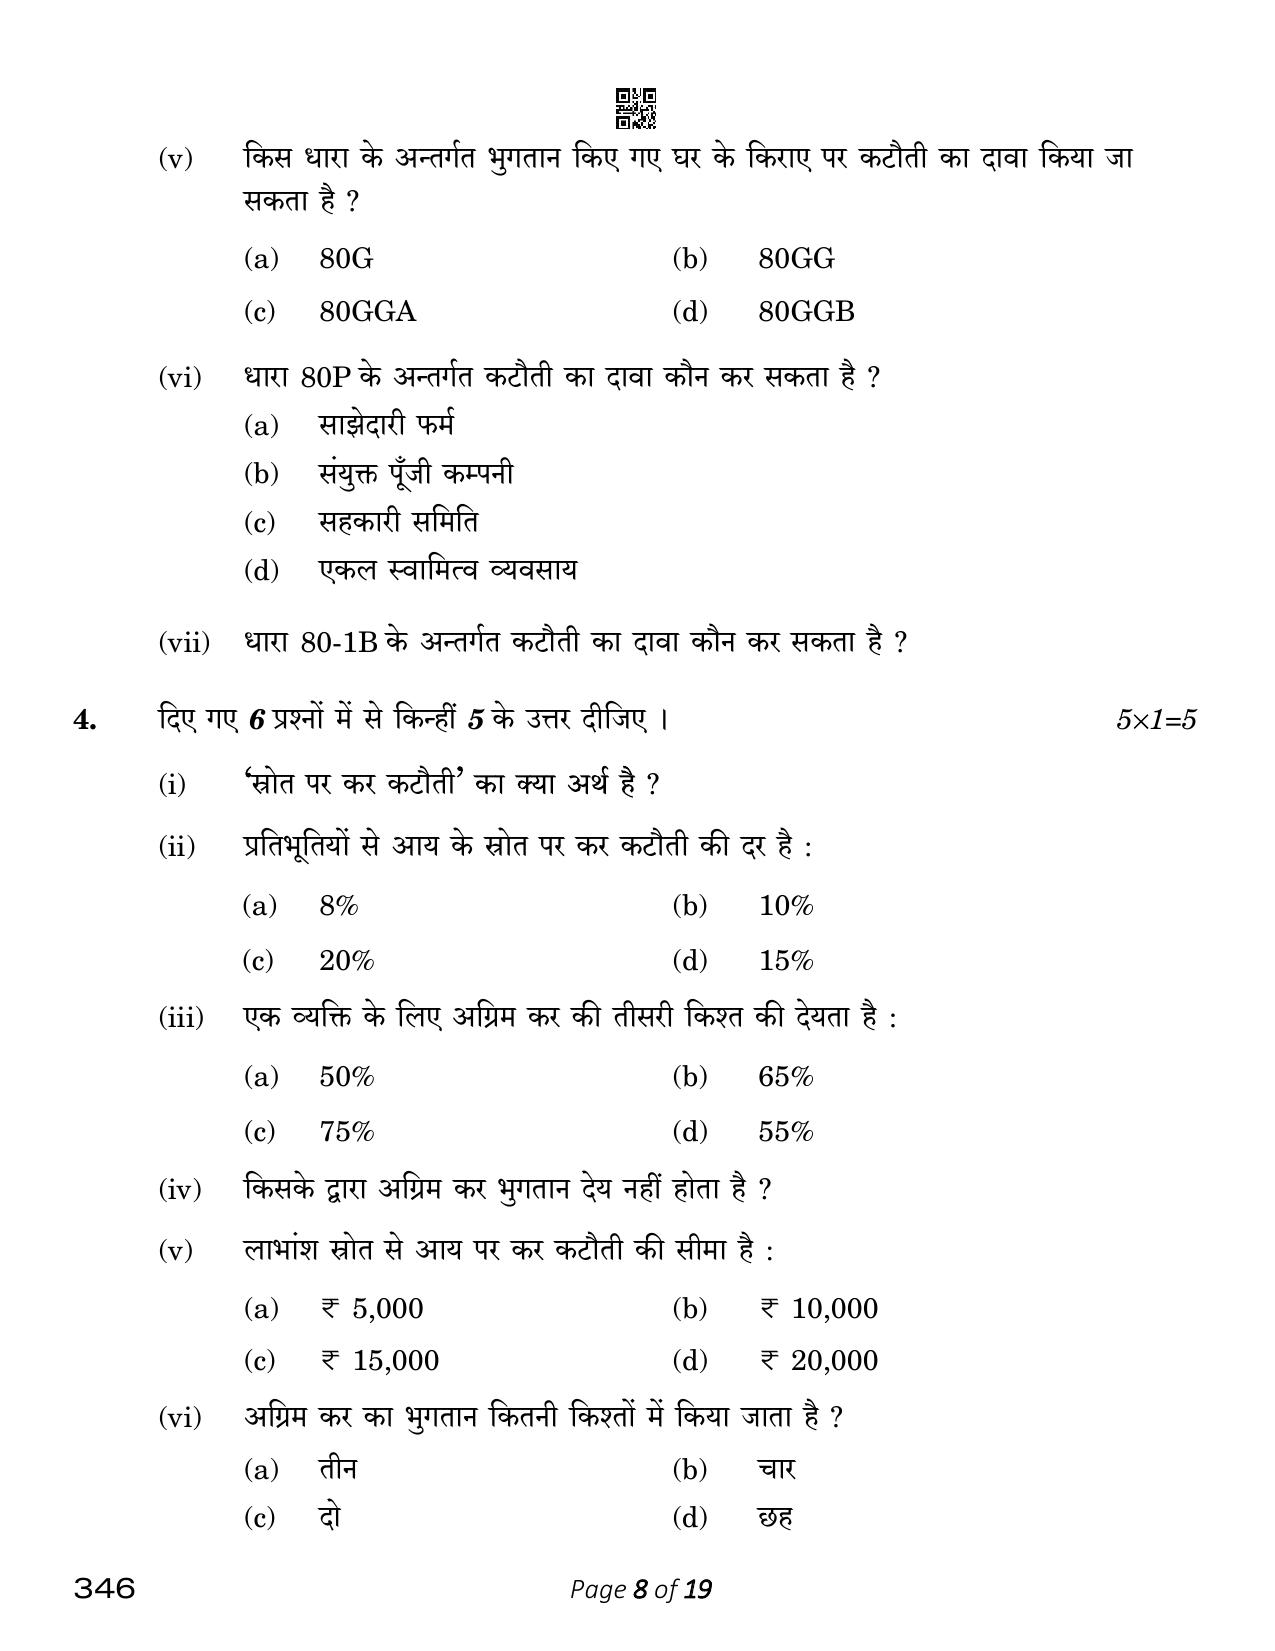 CBSE Class 12 Taxation (Compartment) 2023 Question Paper - Page 8